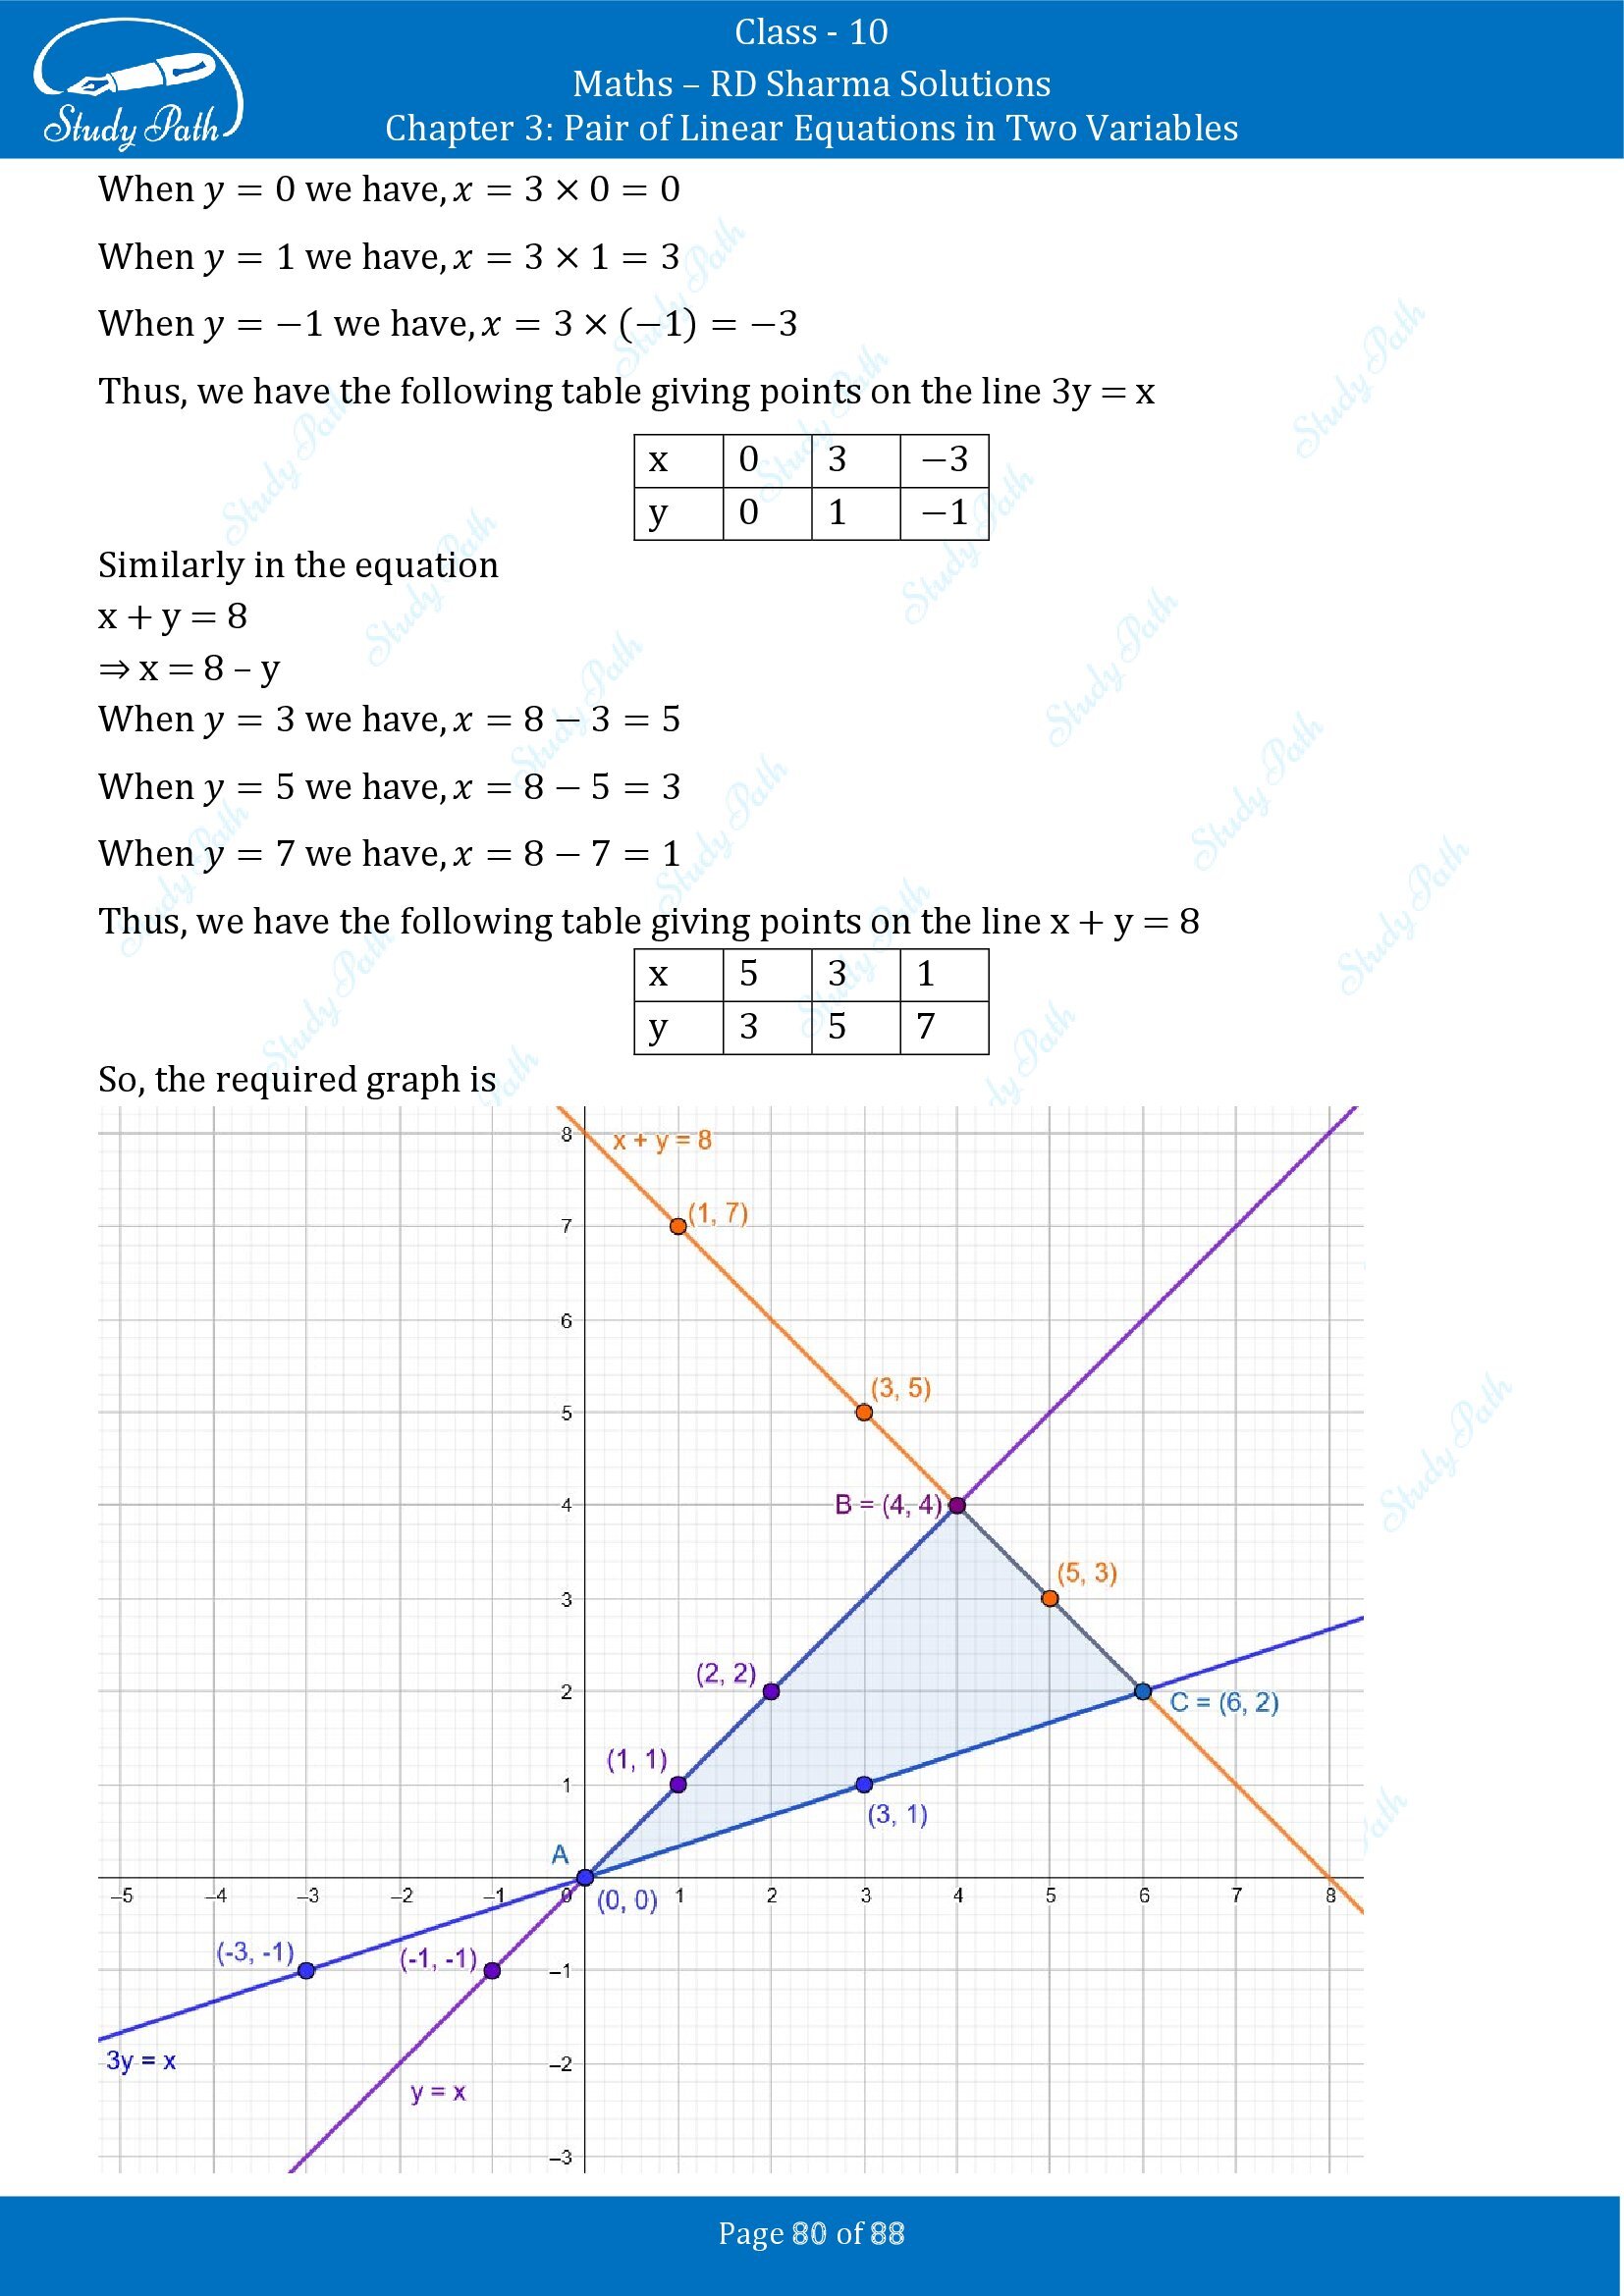 RD Sharma Solutions Class 10 Chapter 3 Pair of Linear Equations in Two Variables Exercise 3.2 00080